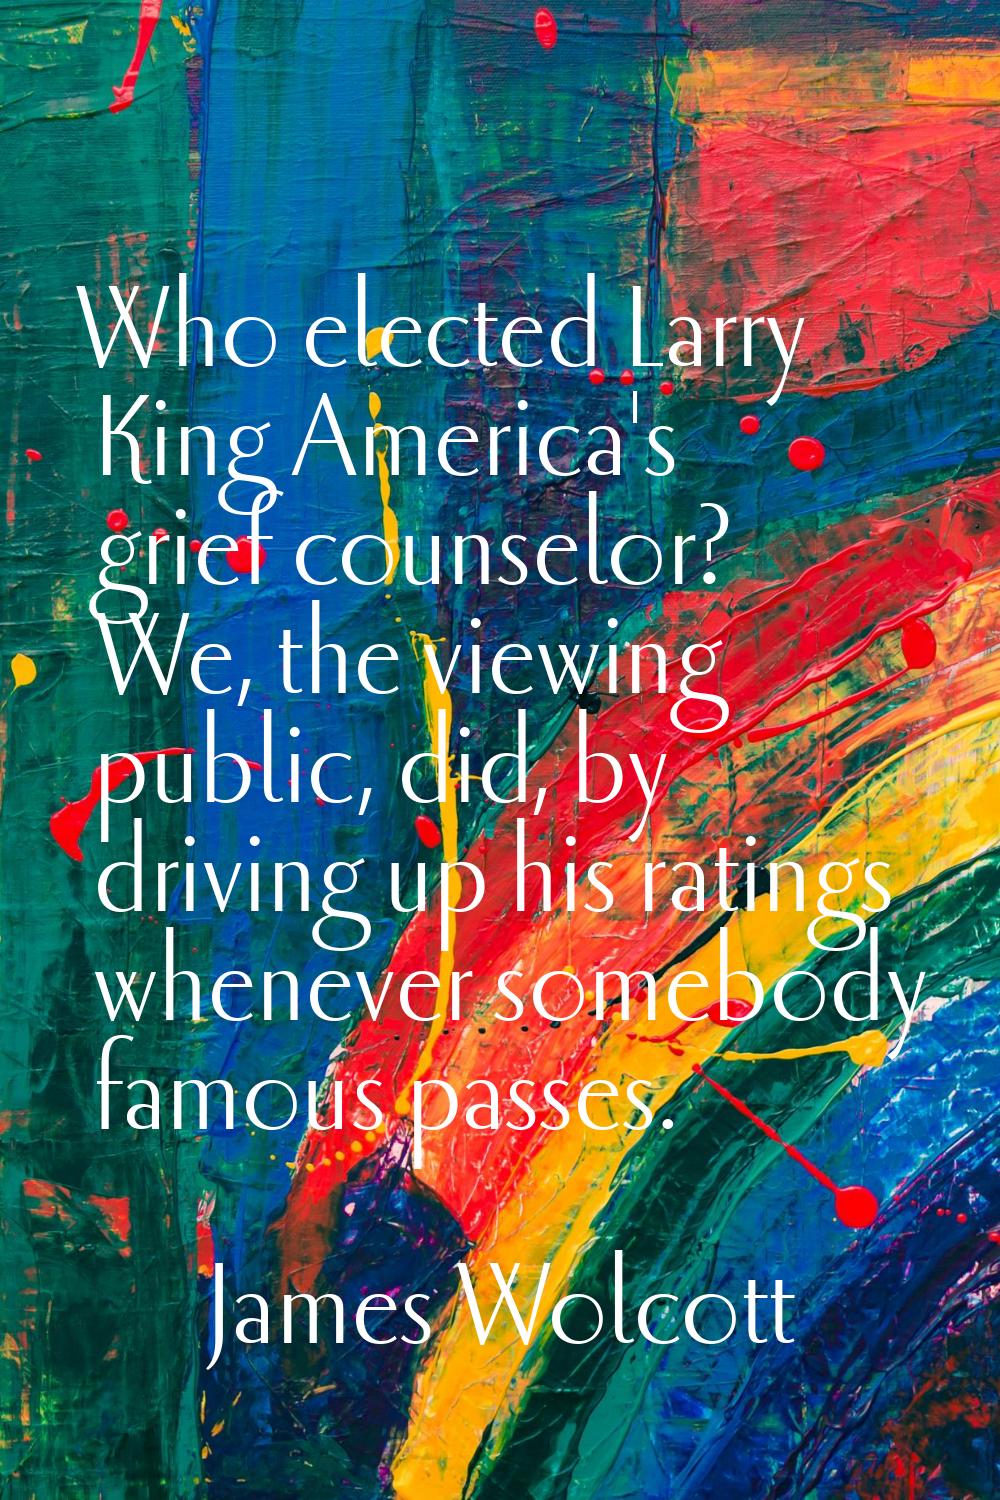 Who elected Larry King America's grief counselor? We, the viewing public, did, by driving up his ra